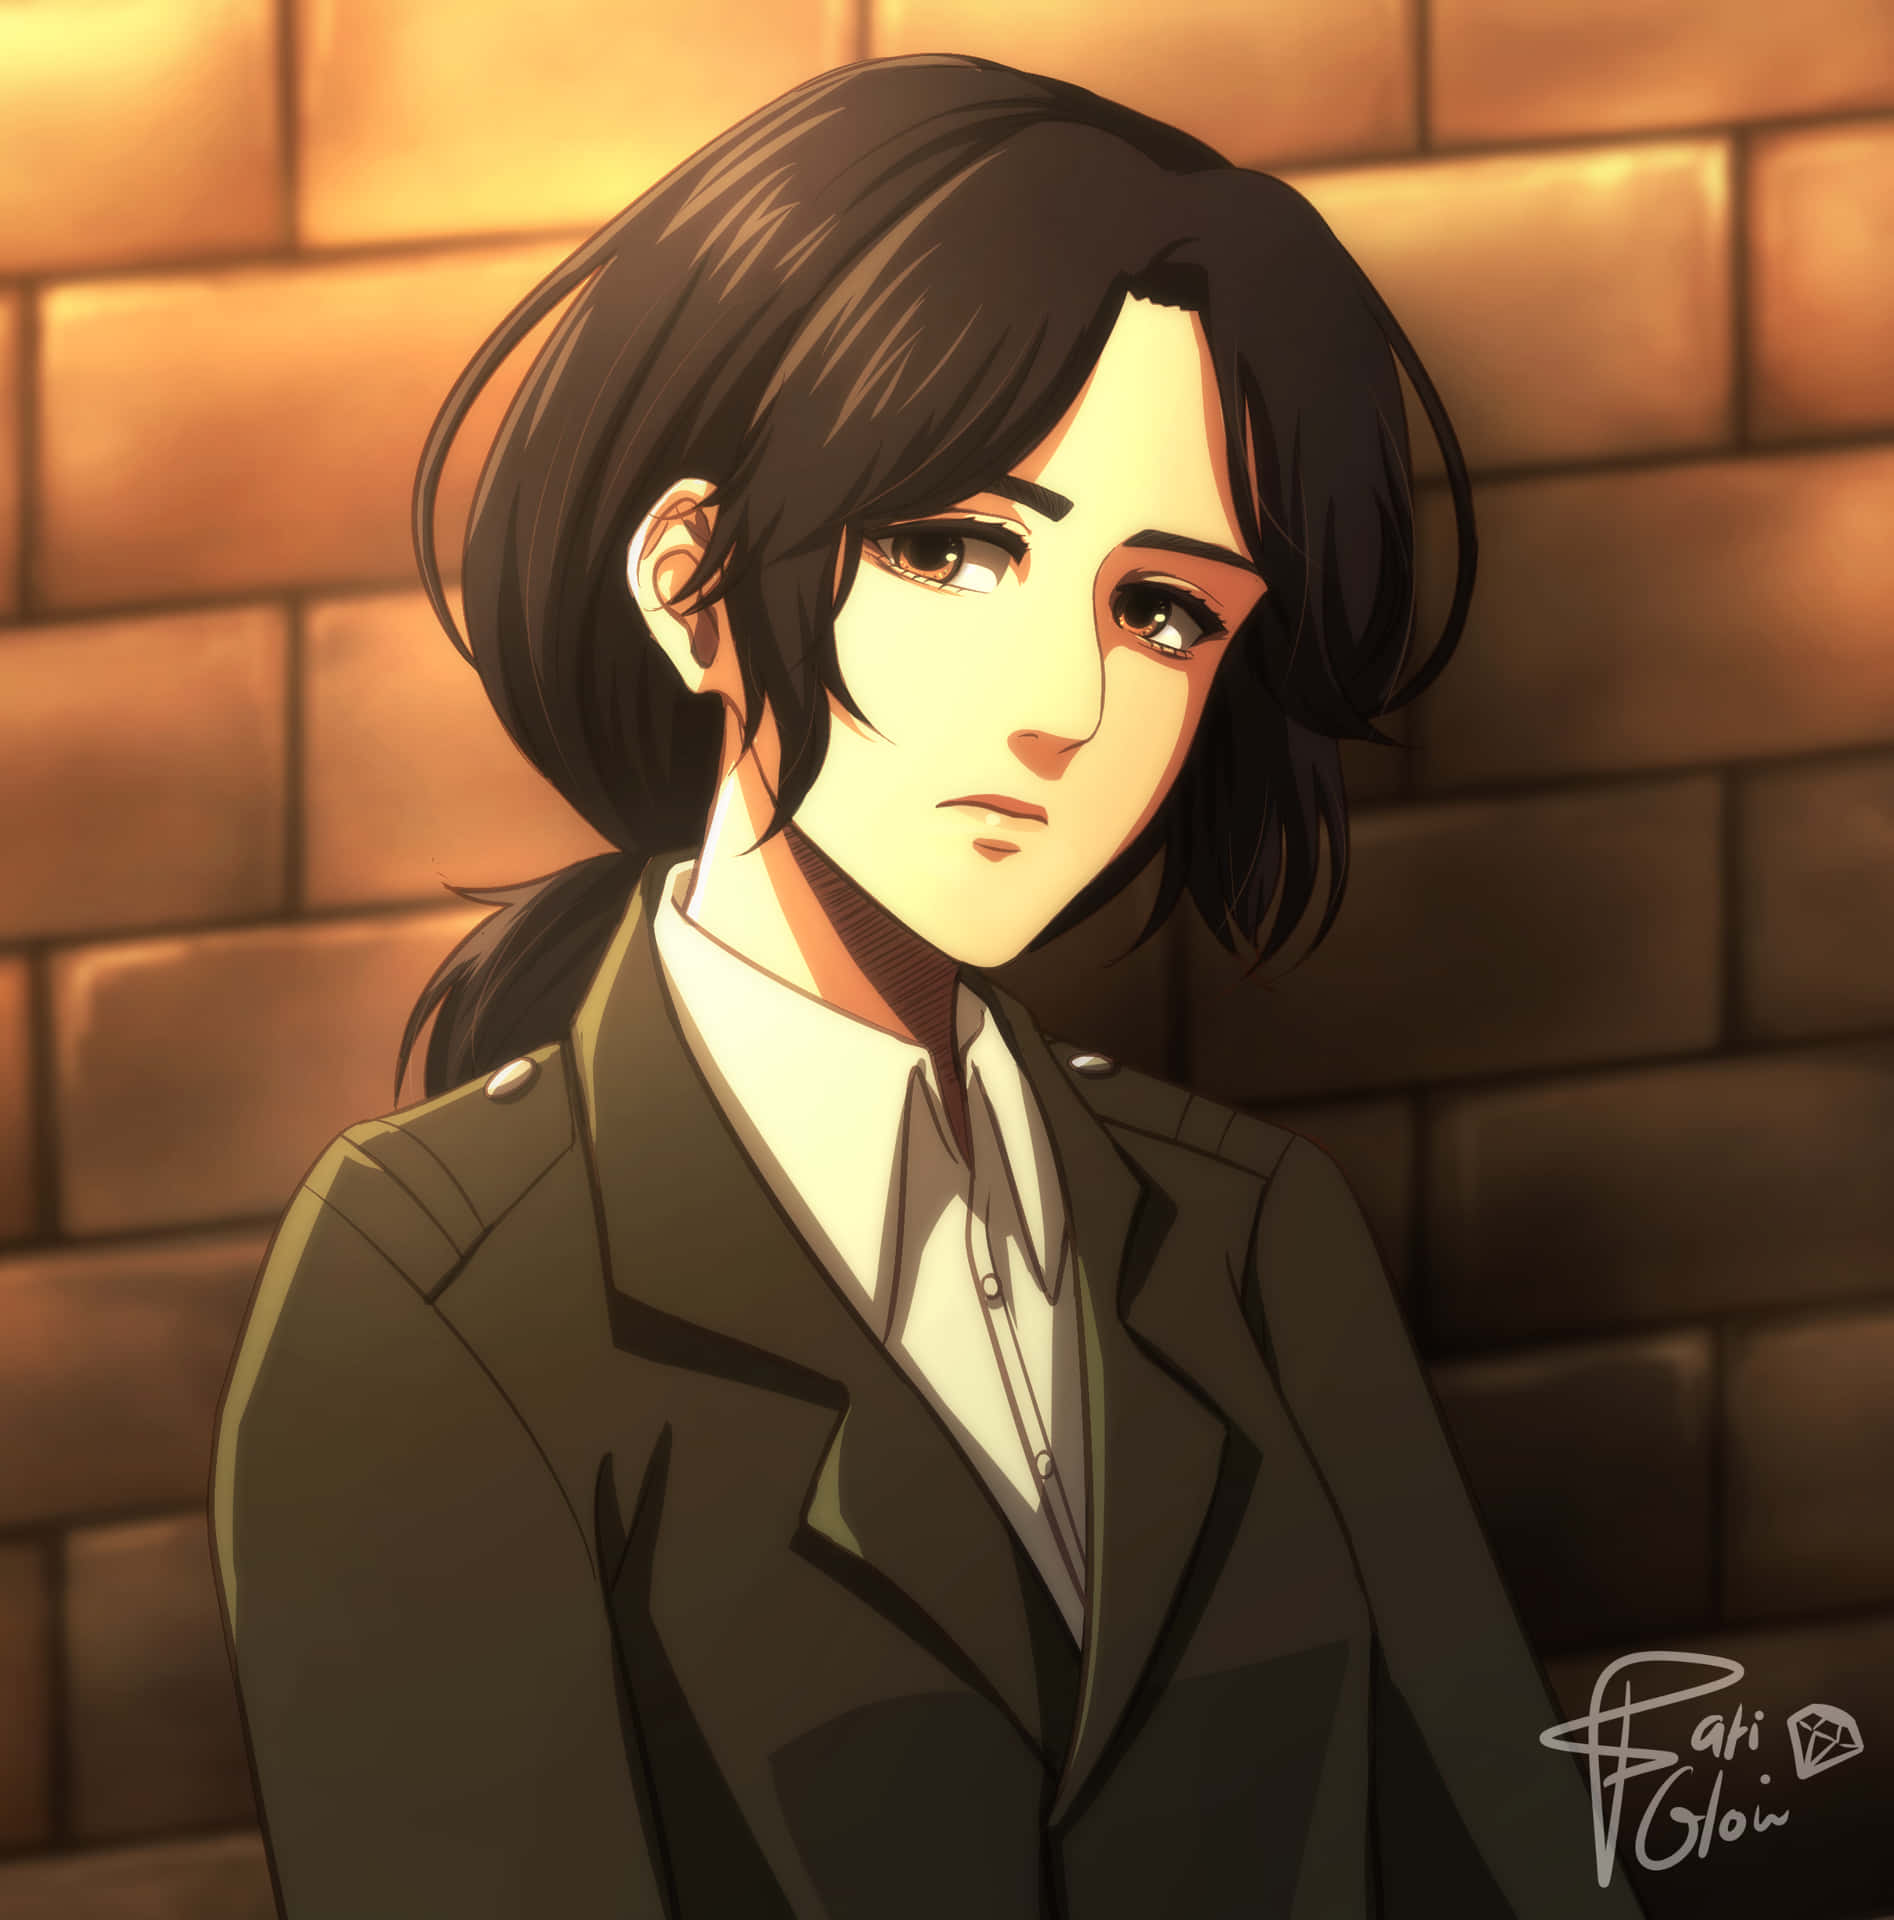 A Girl In A Uniform Leaning Against A Brick Wall Wallpaper